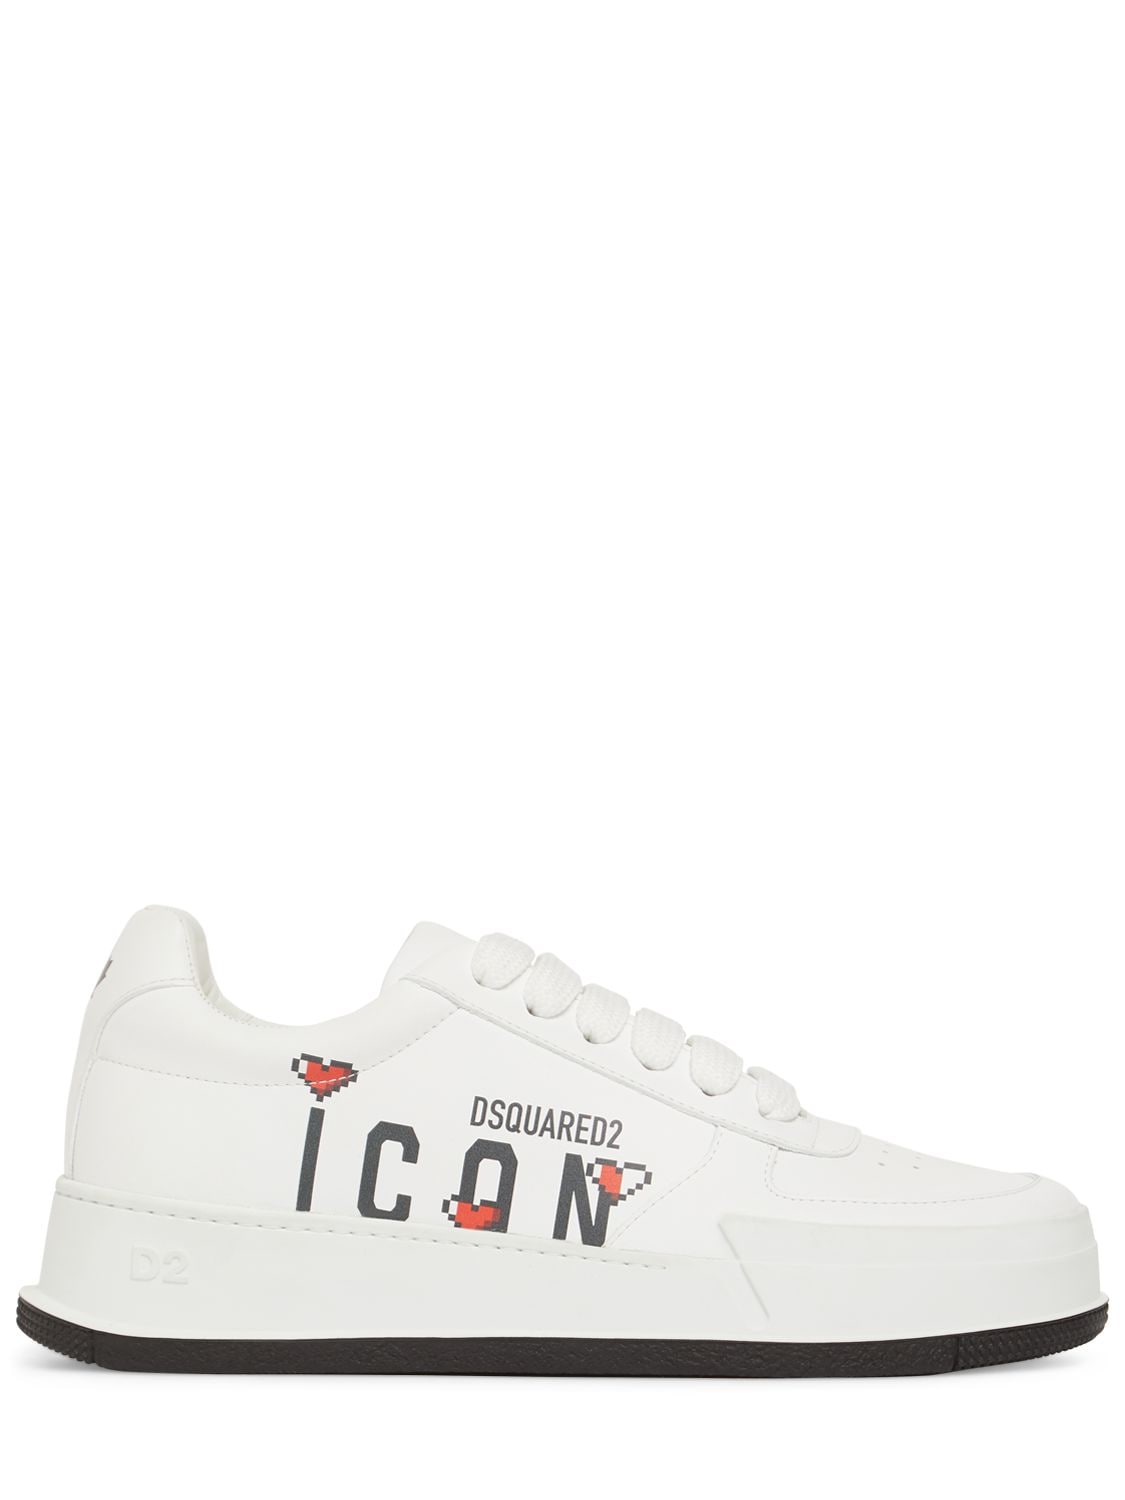 DSQUARED2 ICON LEATHER LOW TOP SNEAKERS